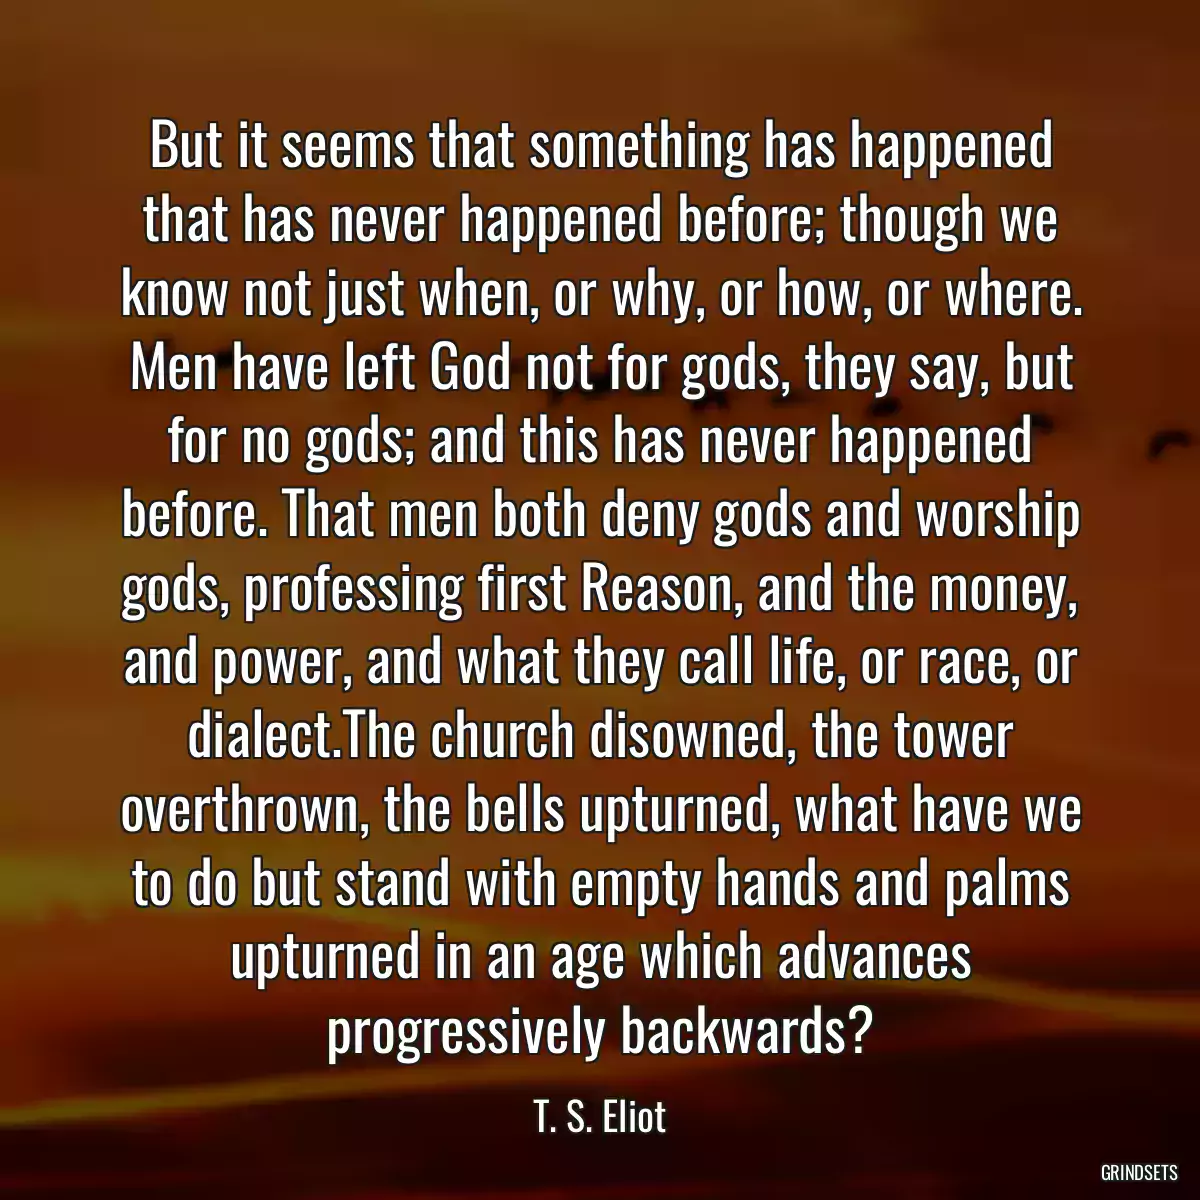 But it seems that something has happened that has never happened before; though we know not just when, or why, or how, or where. Men have left God not for gods, they say, but for no gods; and this has never happened before. That men both deny gods and worship gods, professing first Reason, and the money, and power, and what they call life, or race, or dialect.The church disowned, the tower overthrown, the bells upturned, what have we to do but stand with empty hands and palms upturned in an age which advances progressively backwards?